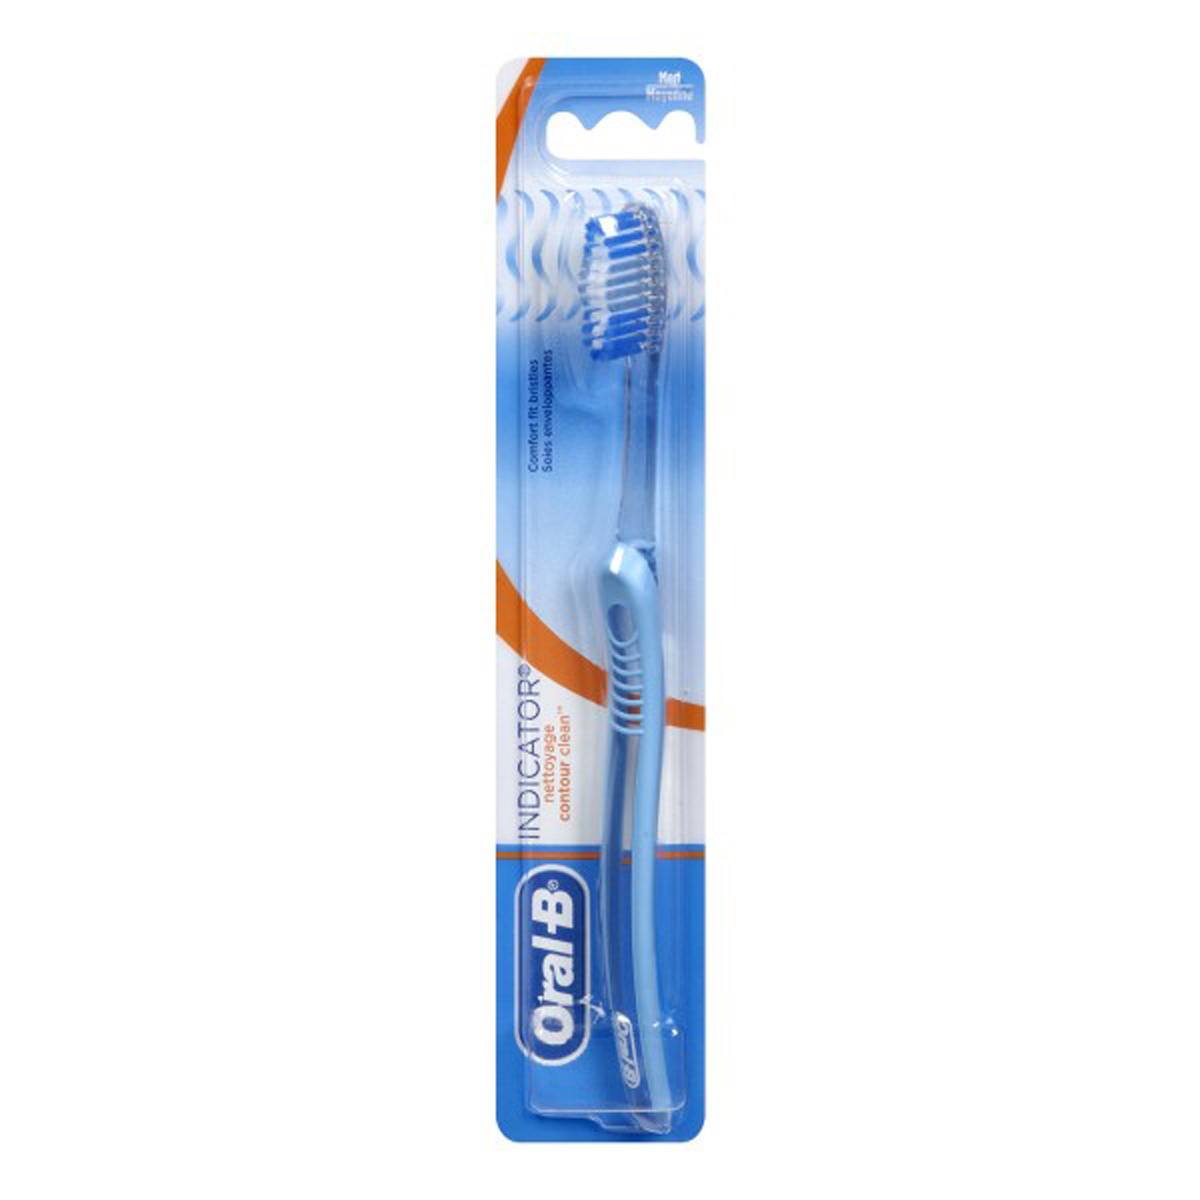 Oral-B Pro 5000 with Bluetooth Technology Electric Rechargeable